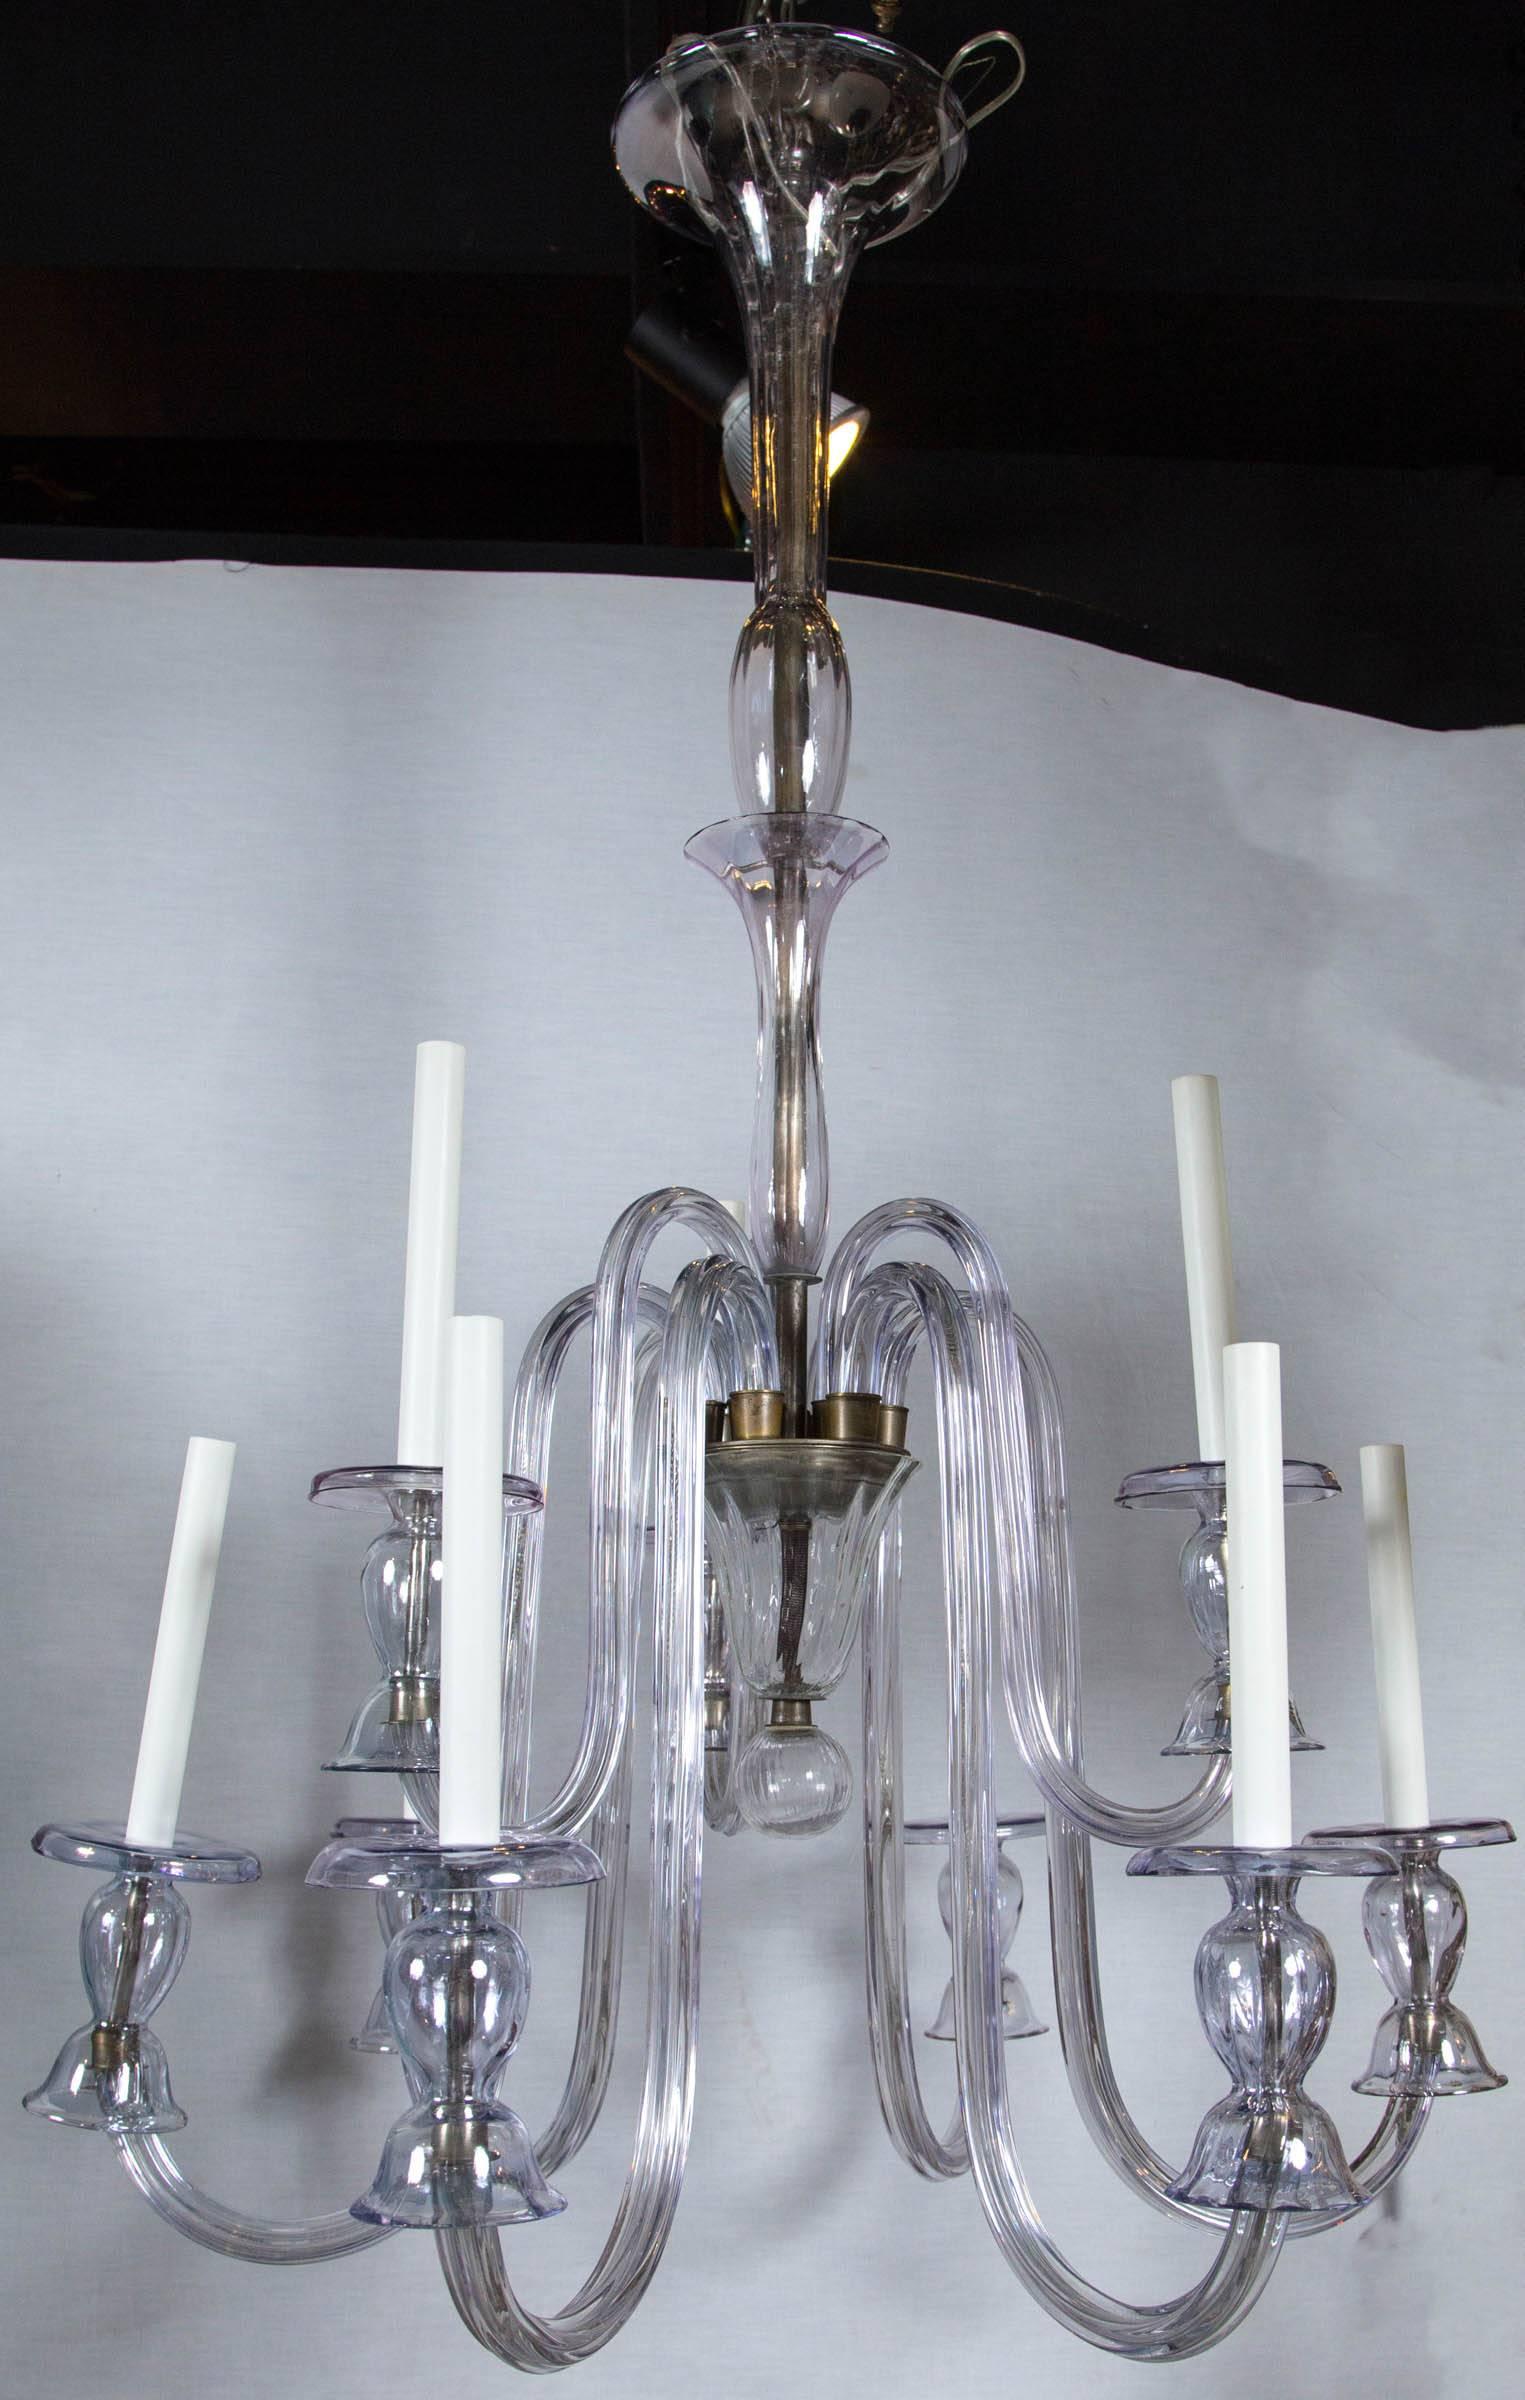 An extremely rare 1950s Murano Italian chandelier in all original condition. Having a large impressive size 45